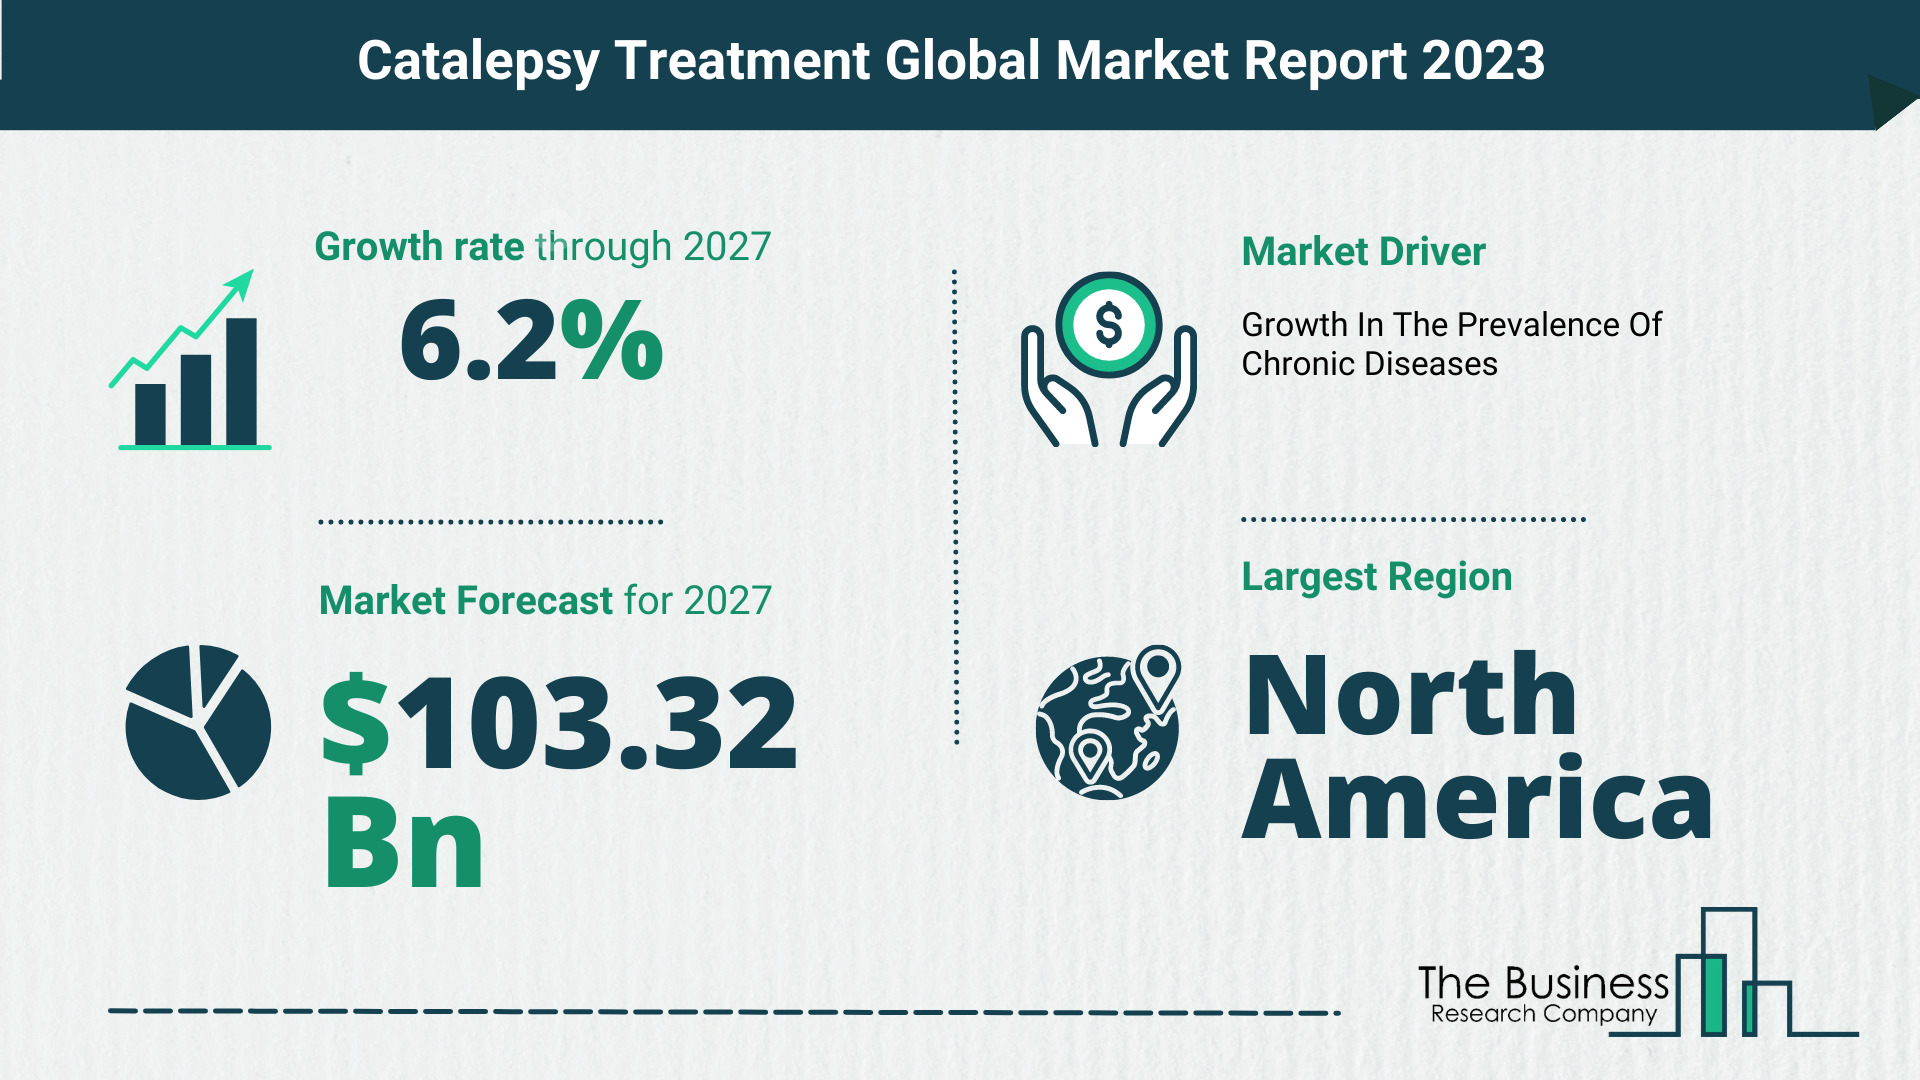 How Will The Catalepsy Treatment Market Globally Expand In 2023?